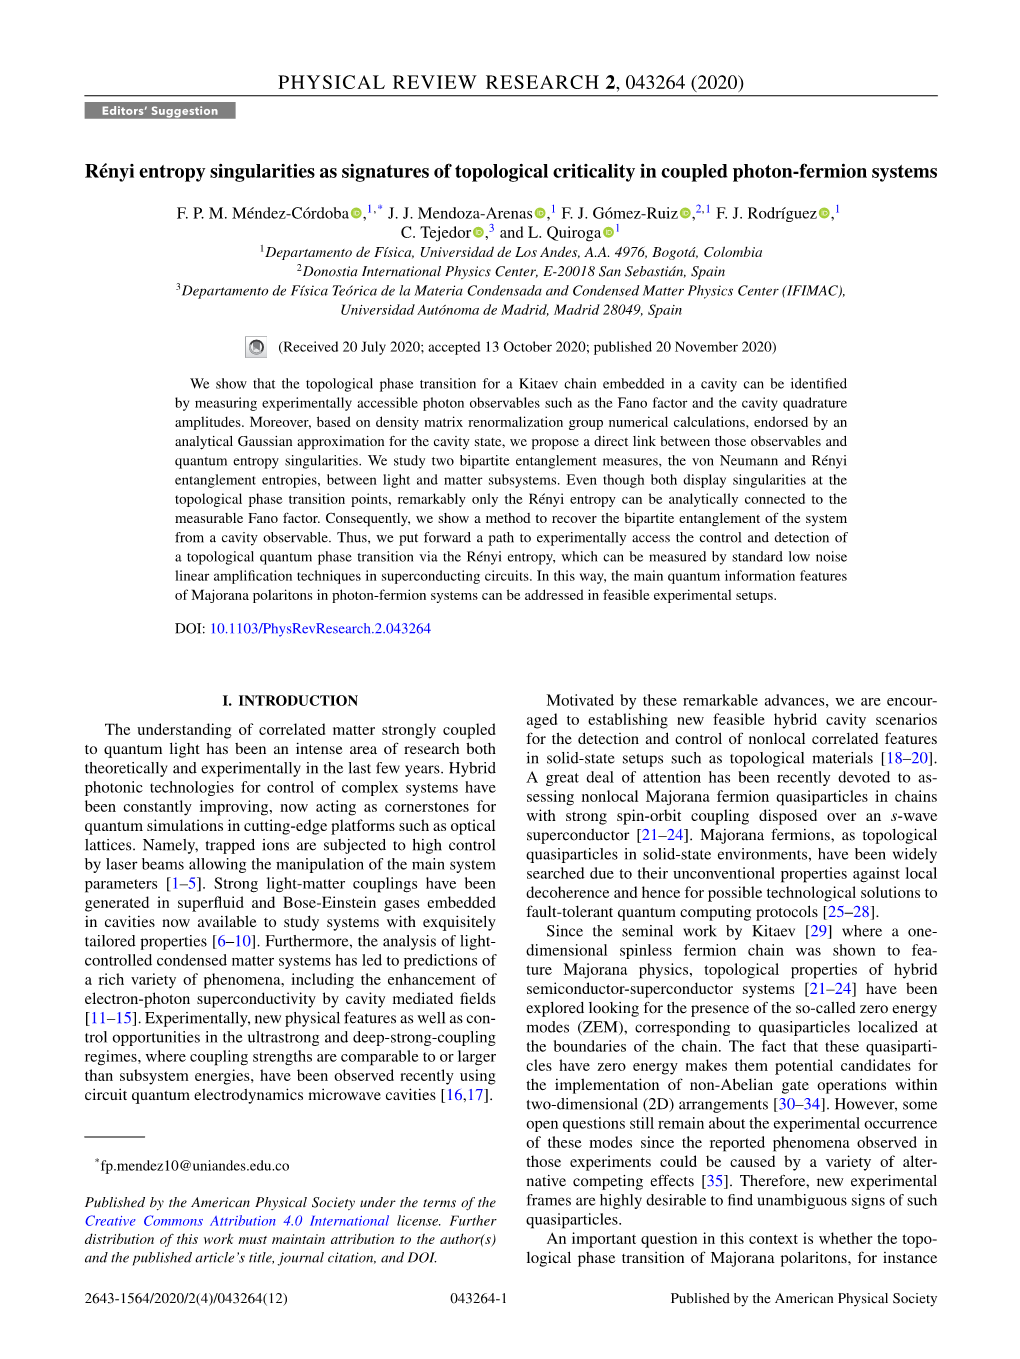 Rényi Entropy Singularities As Signatures of Topological Criticality in Coupled Photon-Fermion Systems